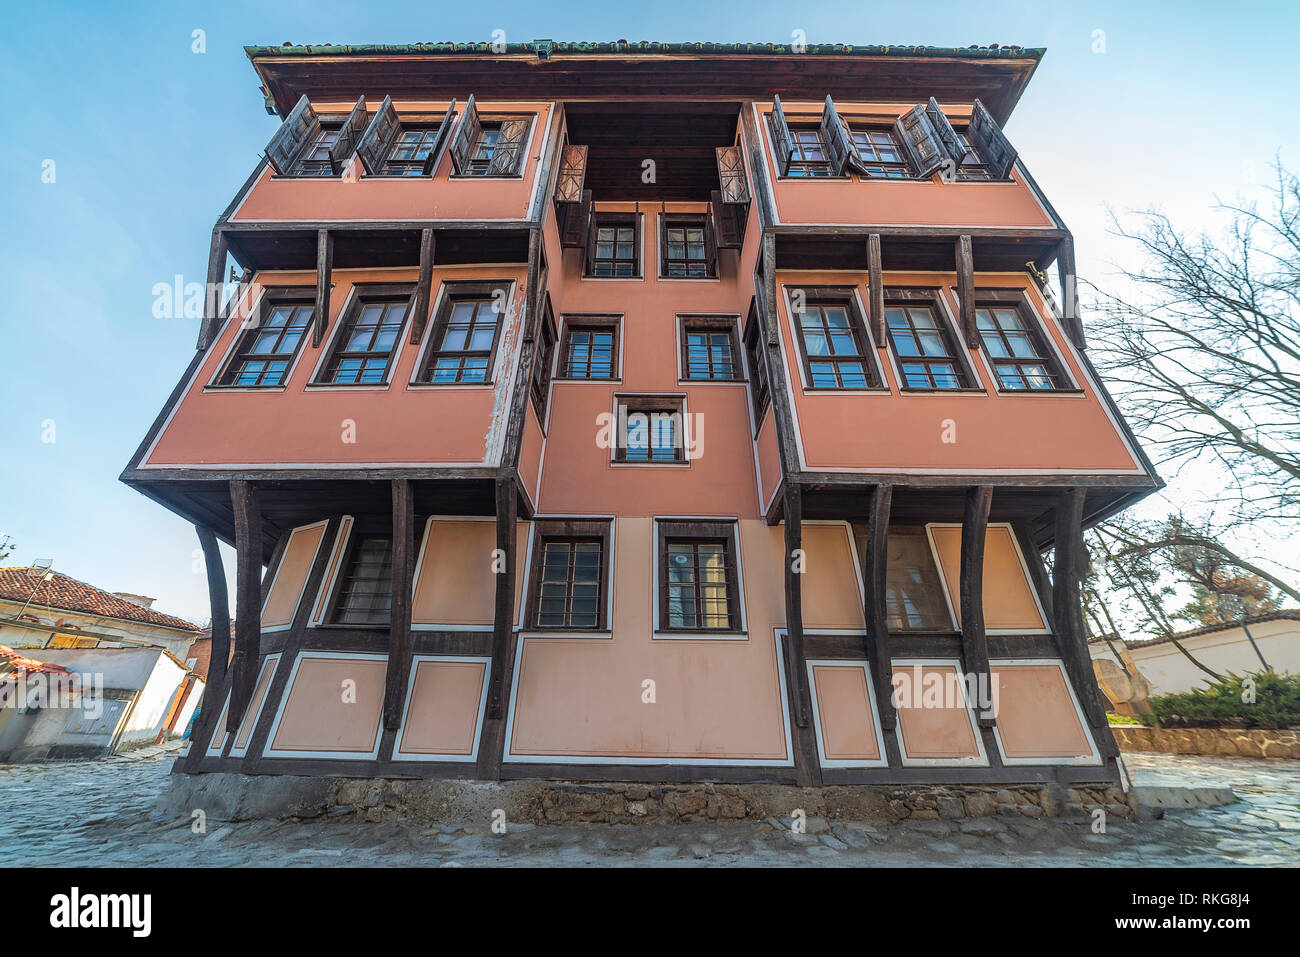 The Lamartine house in the old Town in Plovdiv, Bulgaria. The old town in Plovdiv is included in UNESCO World Heritage tentative list Stock Photo